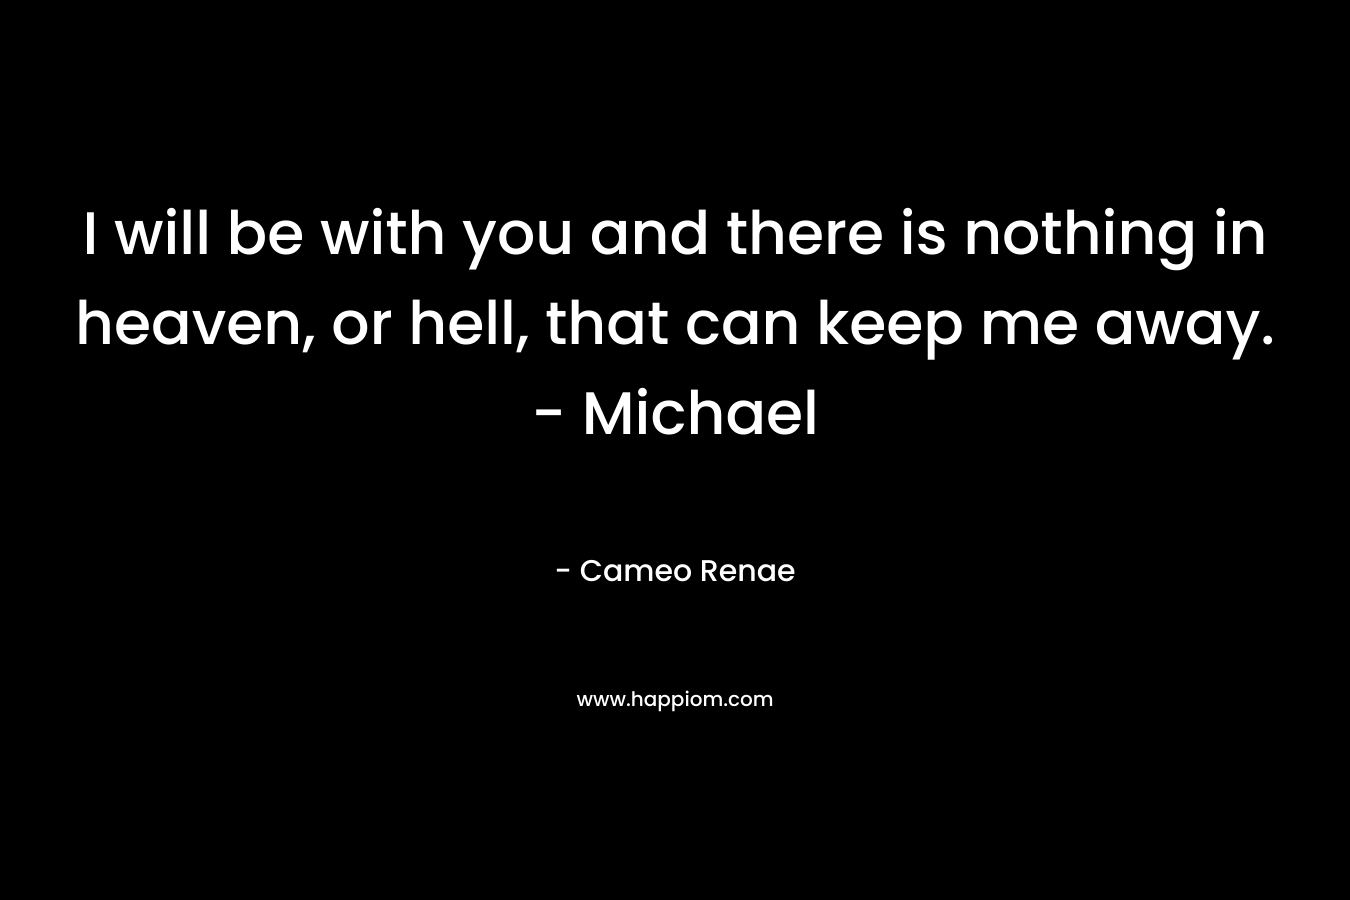 I will be with you and there is nothing in heaven, or hell, that can keep me away. - Michael